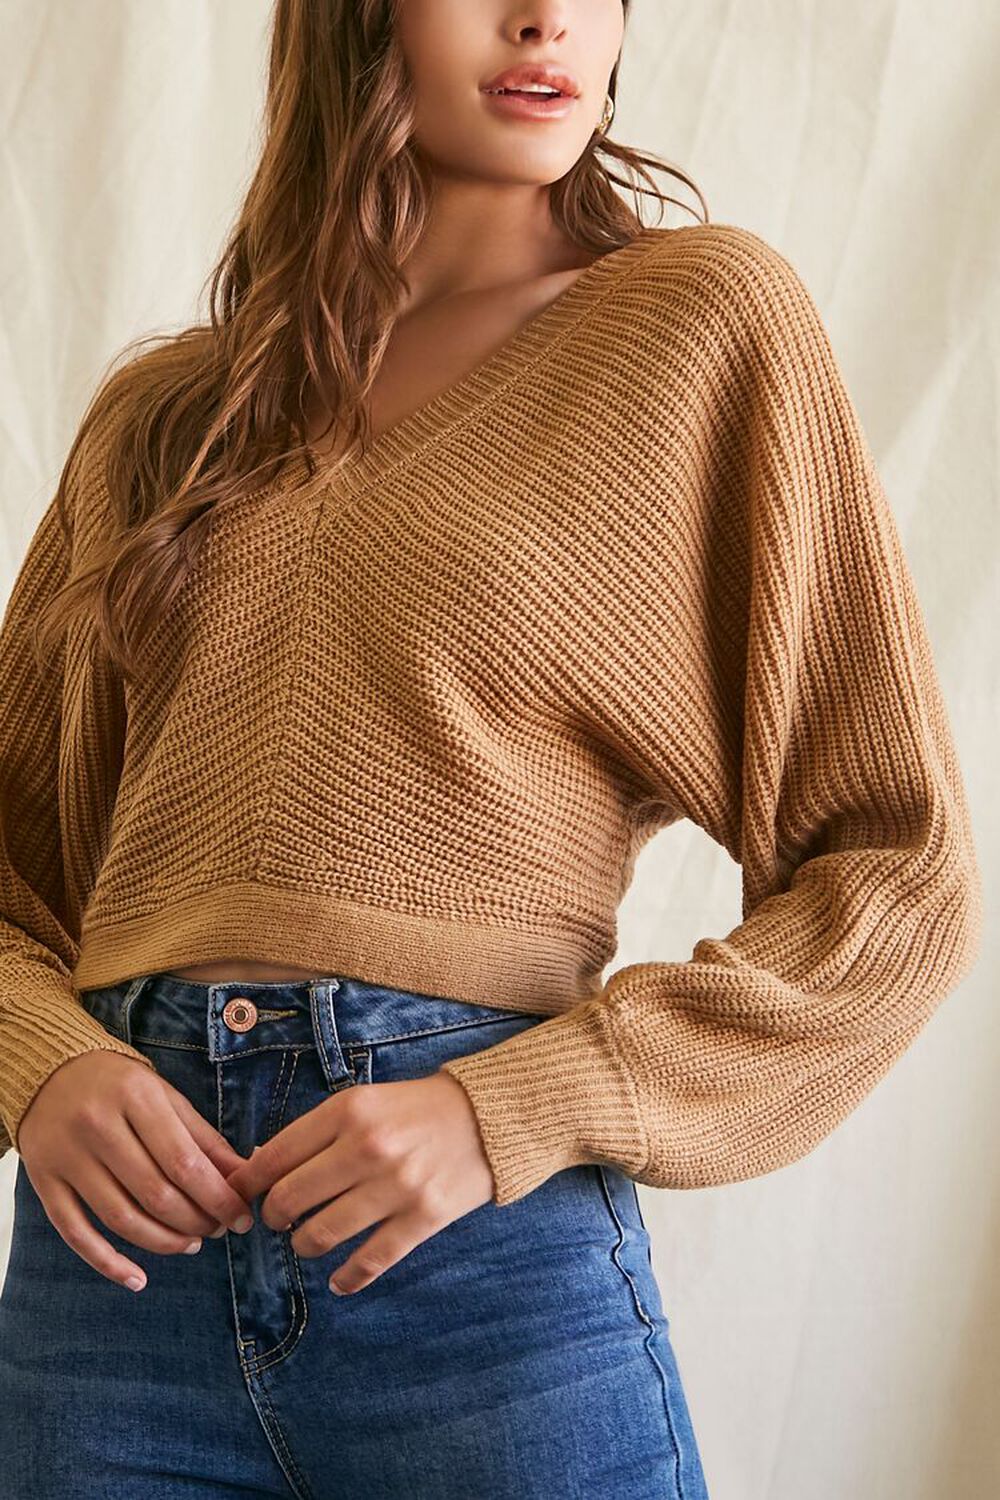 Ribbed Knit Tie-Back Sweater, image 1